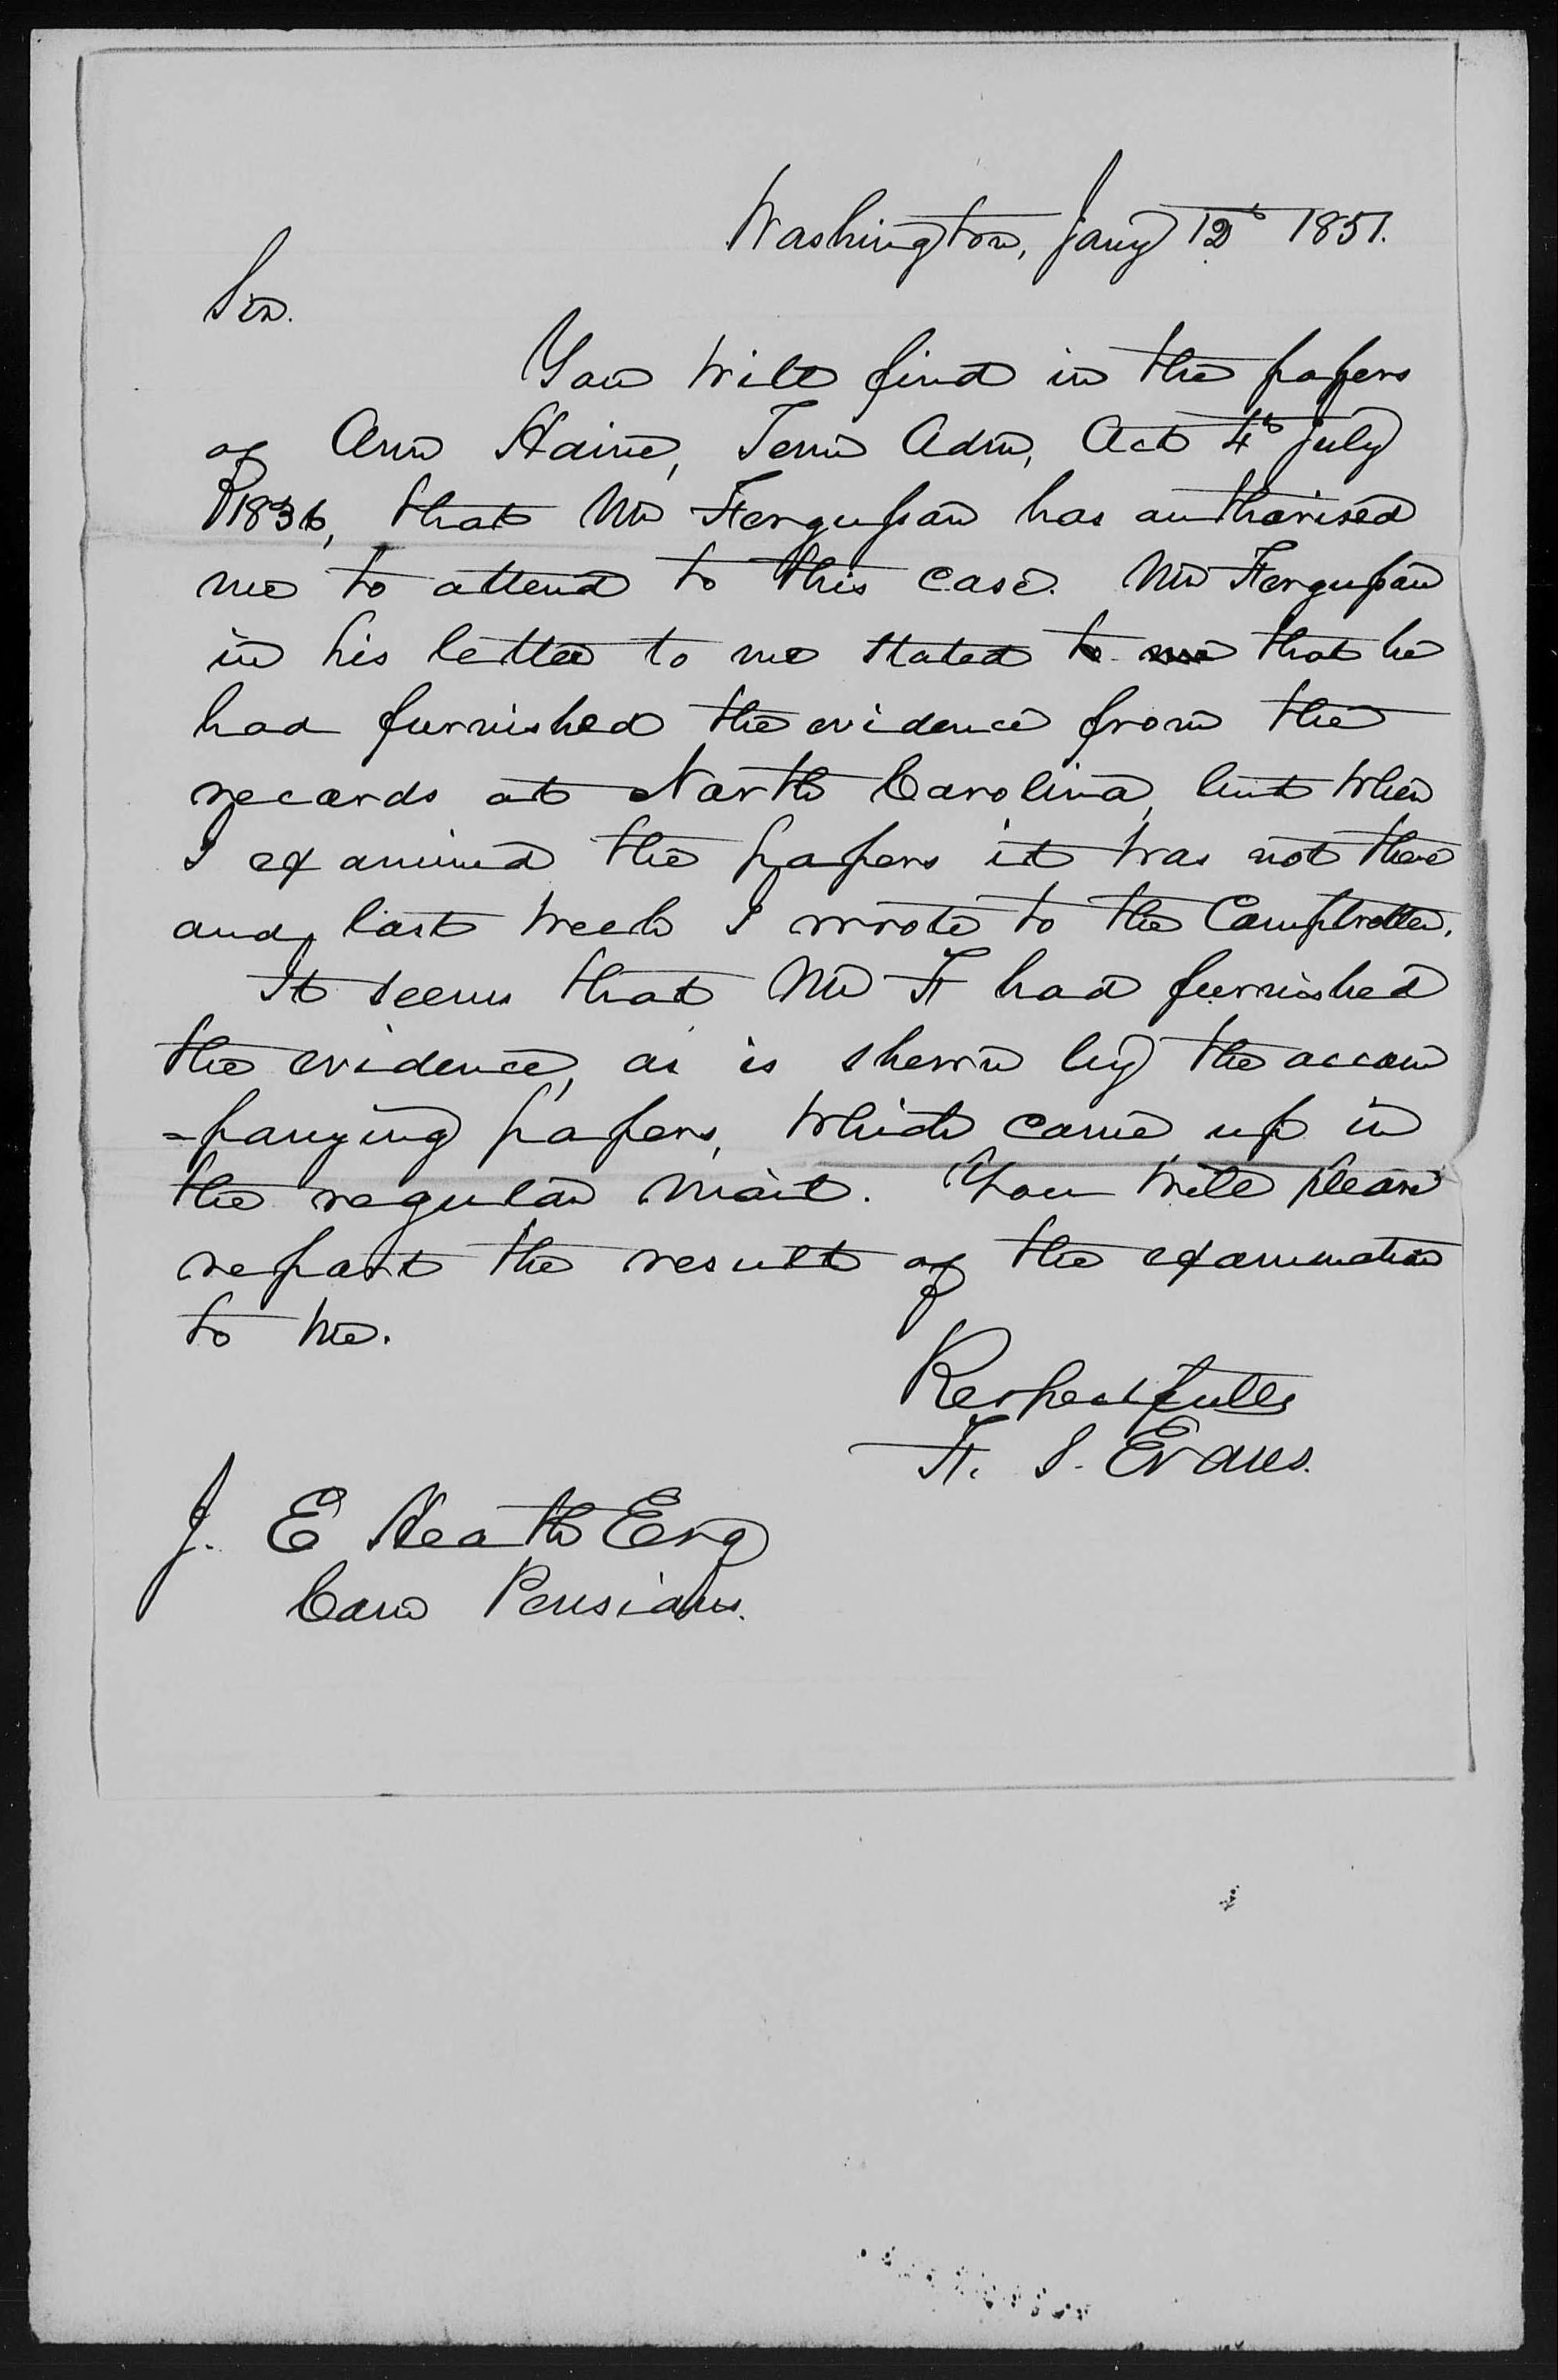 Letter from H. S. Evans to James Ewell Heath, 12 January 1851, page 1